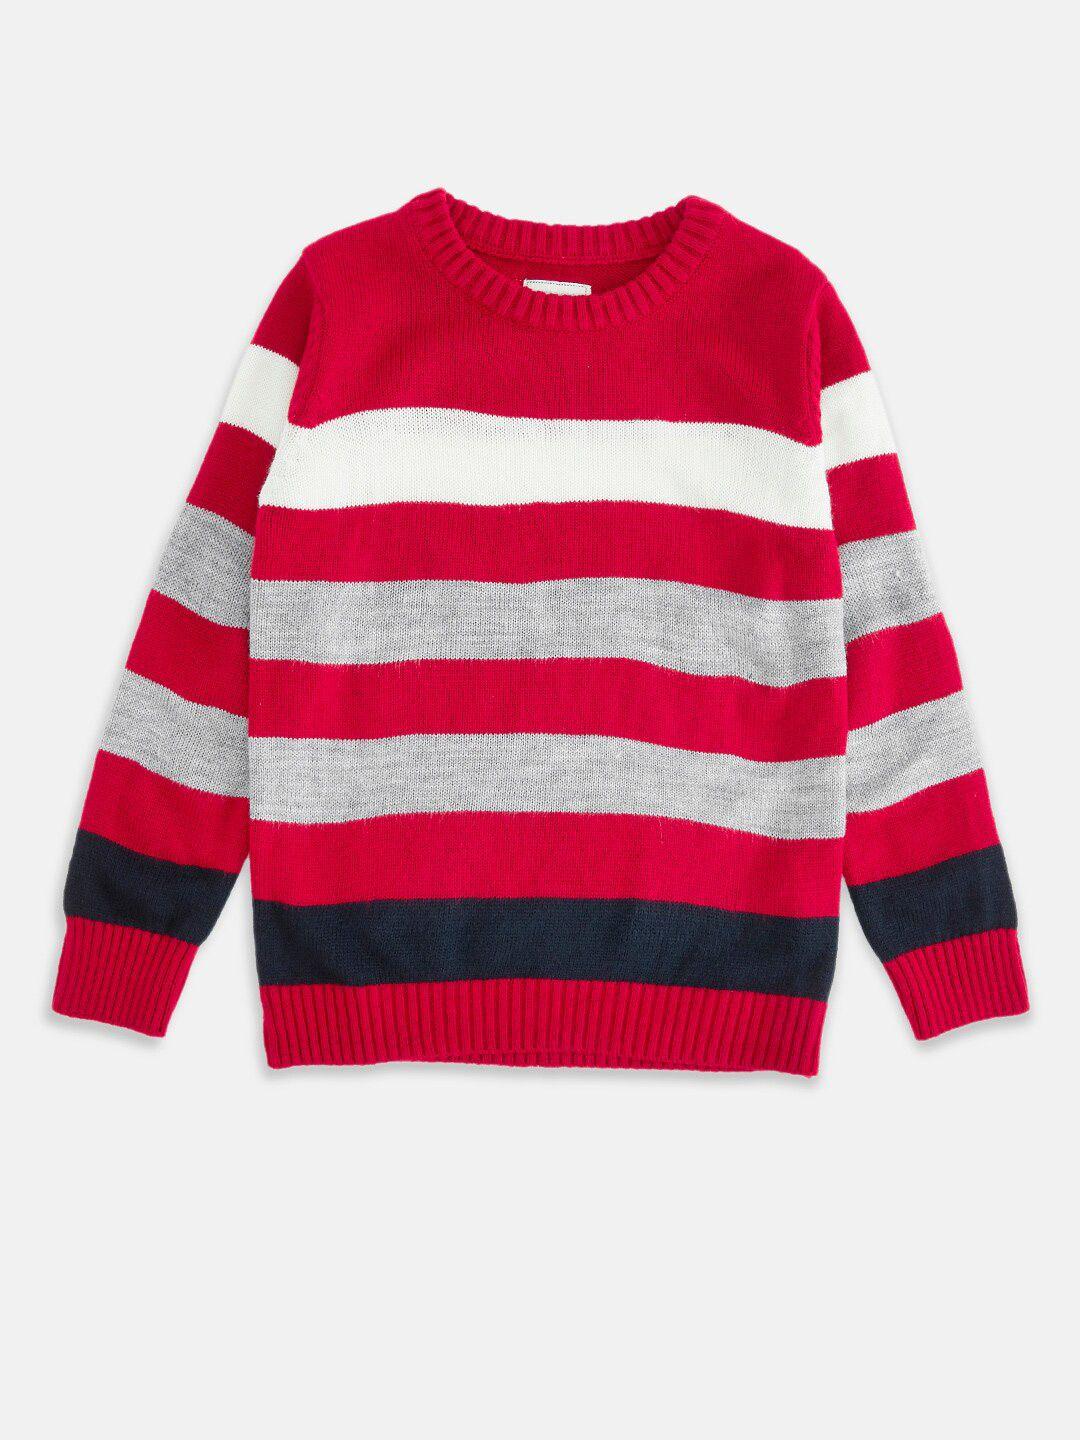 pantaloons junior boys red & white striped pullover